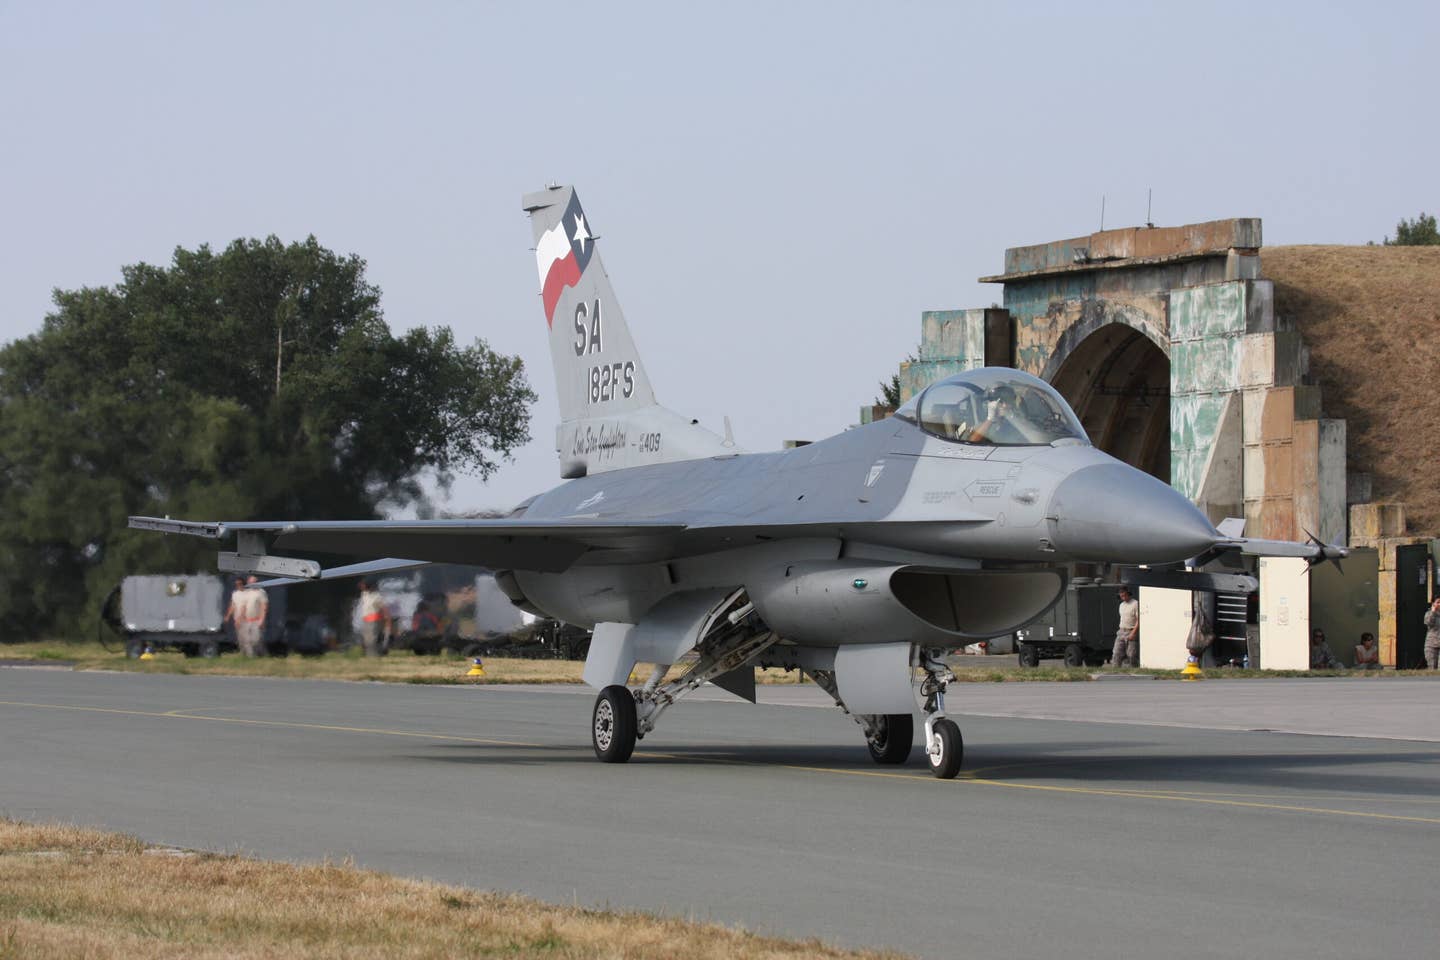 An F-16C from the Texas Air National Guard’s 149th Fighter Wing taxis past a Cold War-era hardened aircraft shelter at Caslav air base after a flight. <em>U.S. Air Force photo by Capt Randy Saldivar</em>